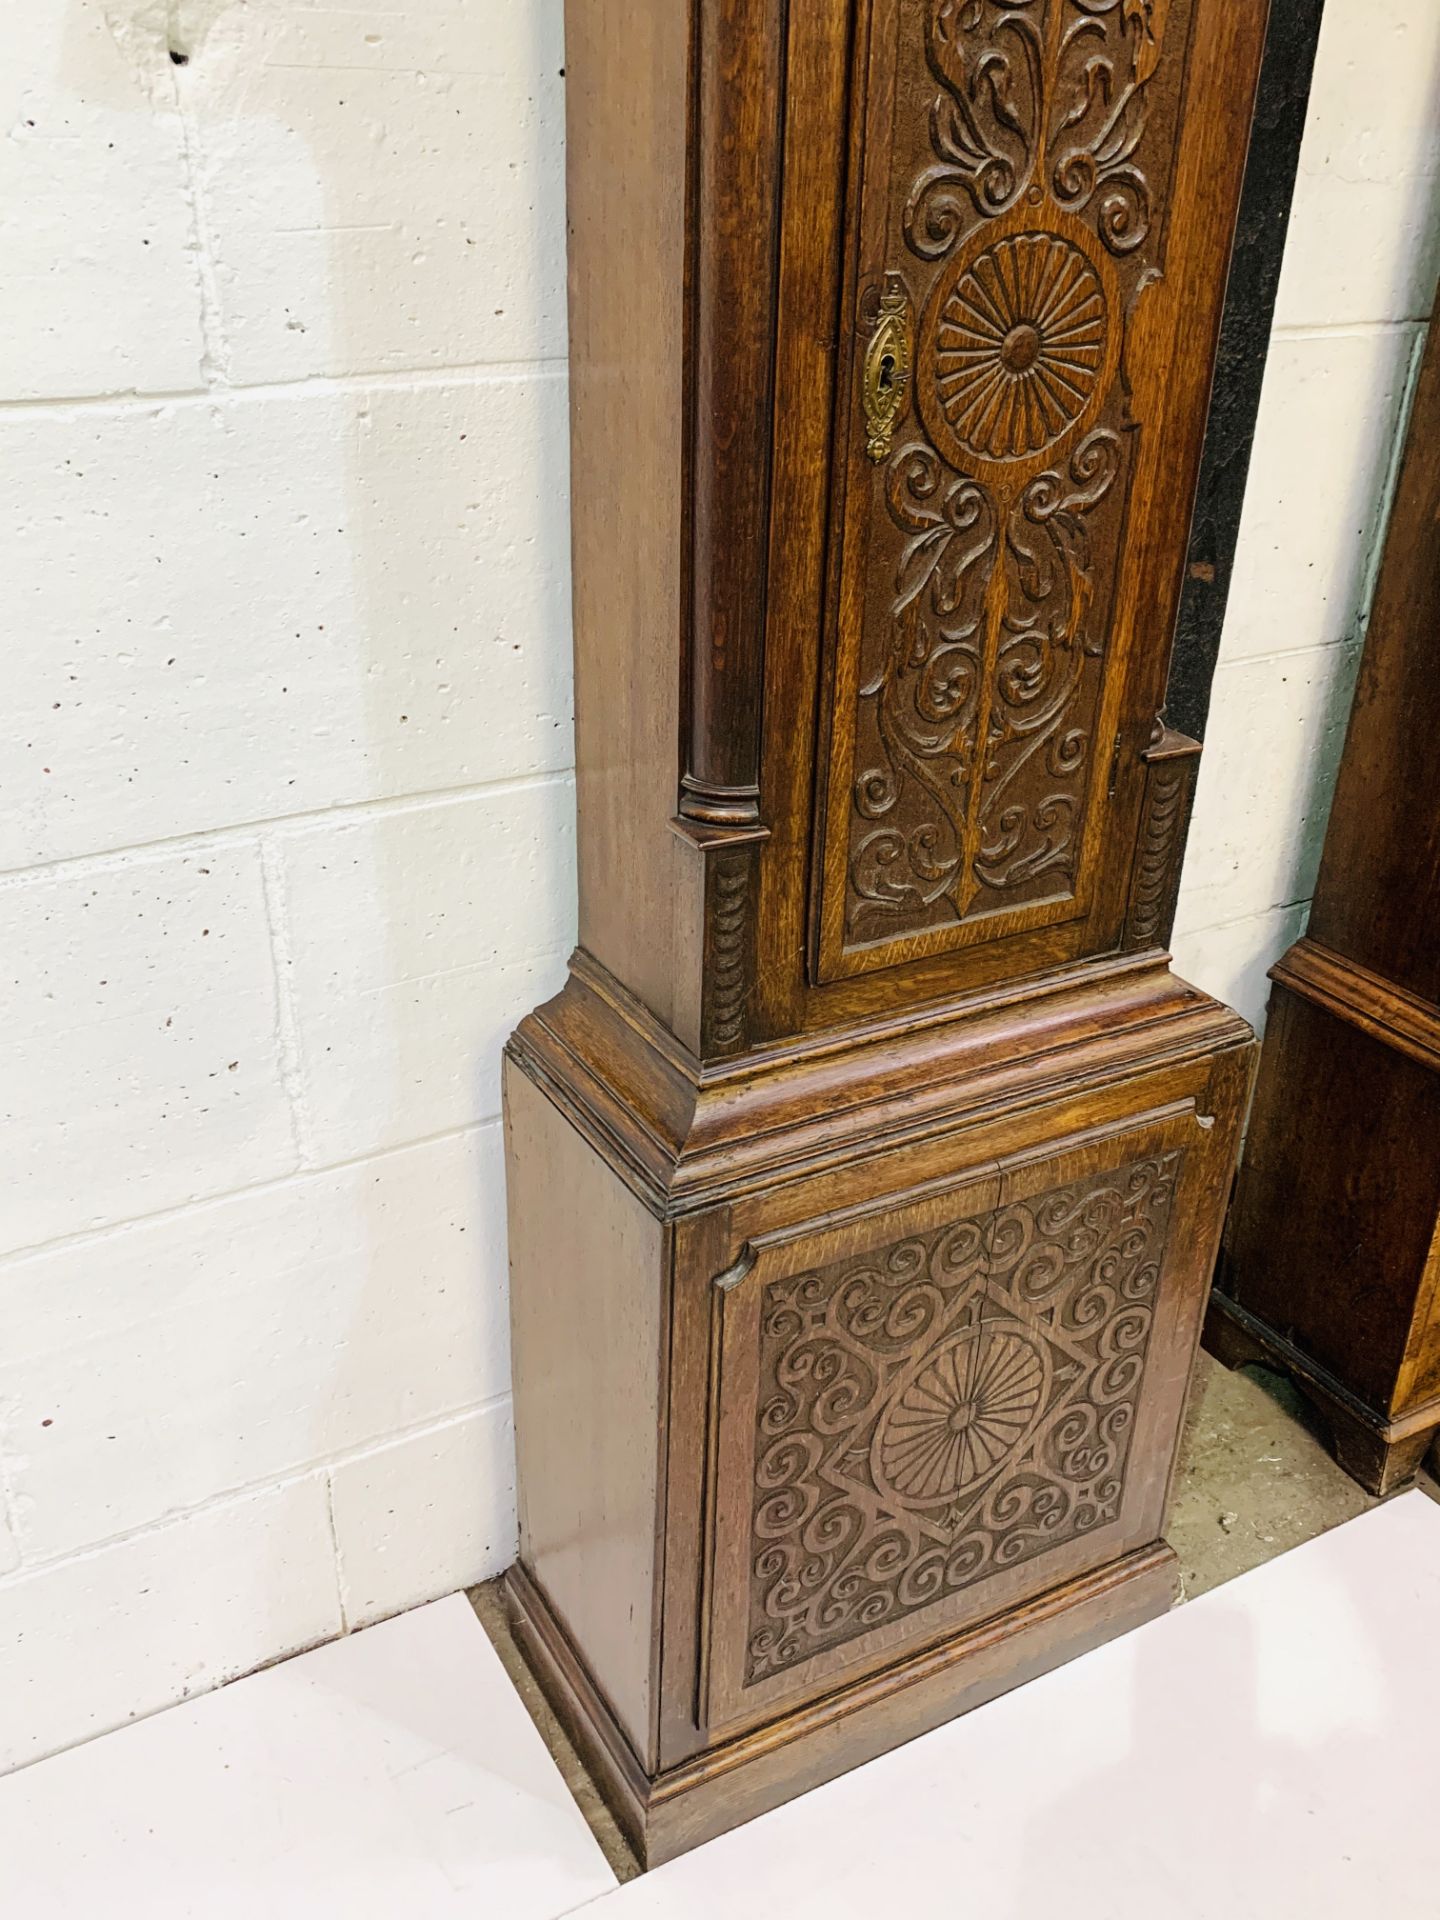 Oak long case clock by Thomas Lister of Halifax - Image 7 of 11